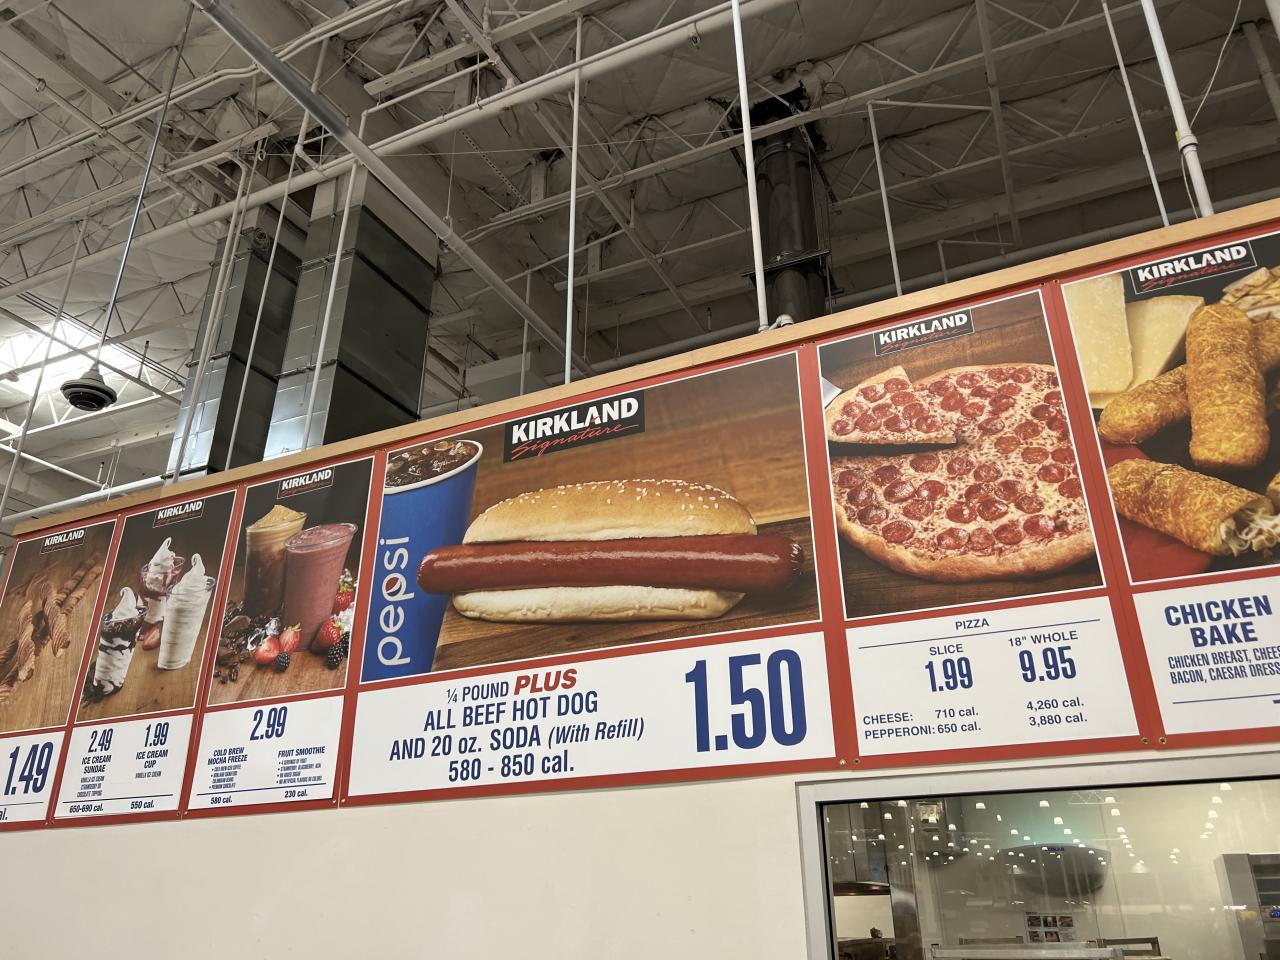 Costco Cfo Says The .50 Hot-Dog-And-Soda Combo Is 'Forever'